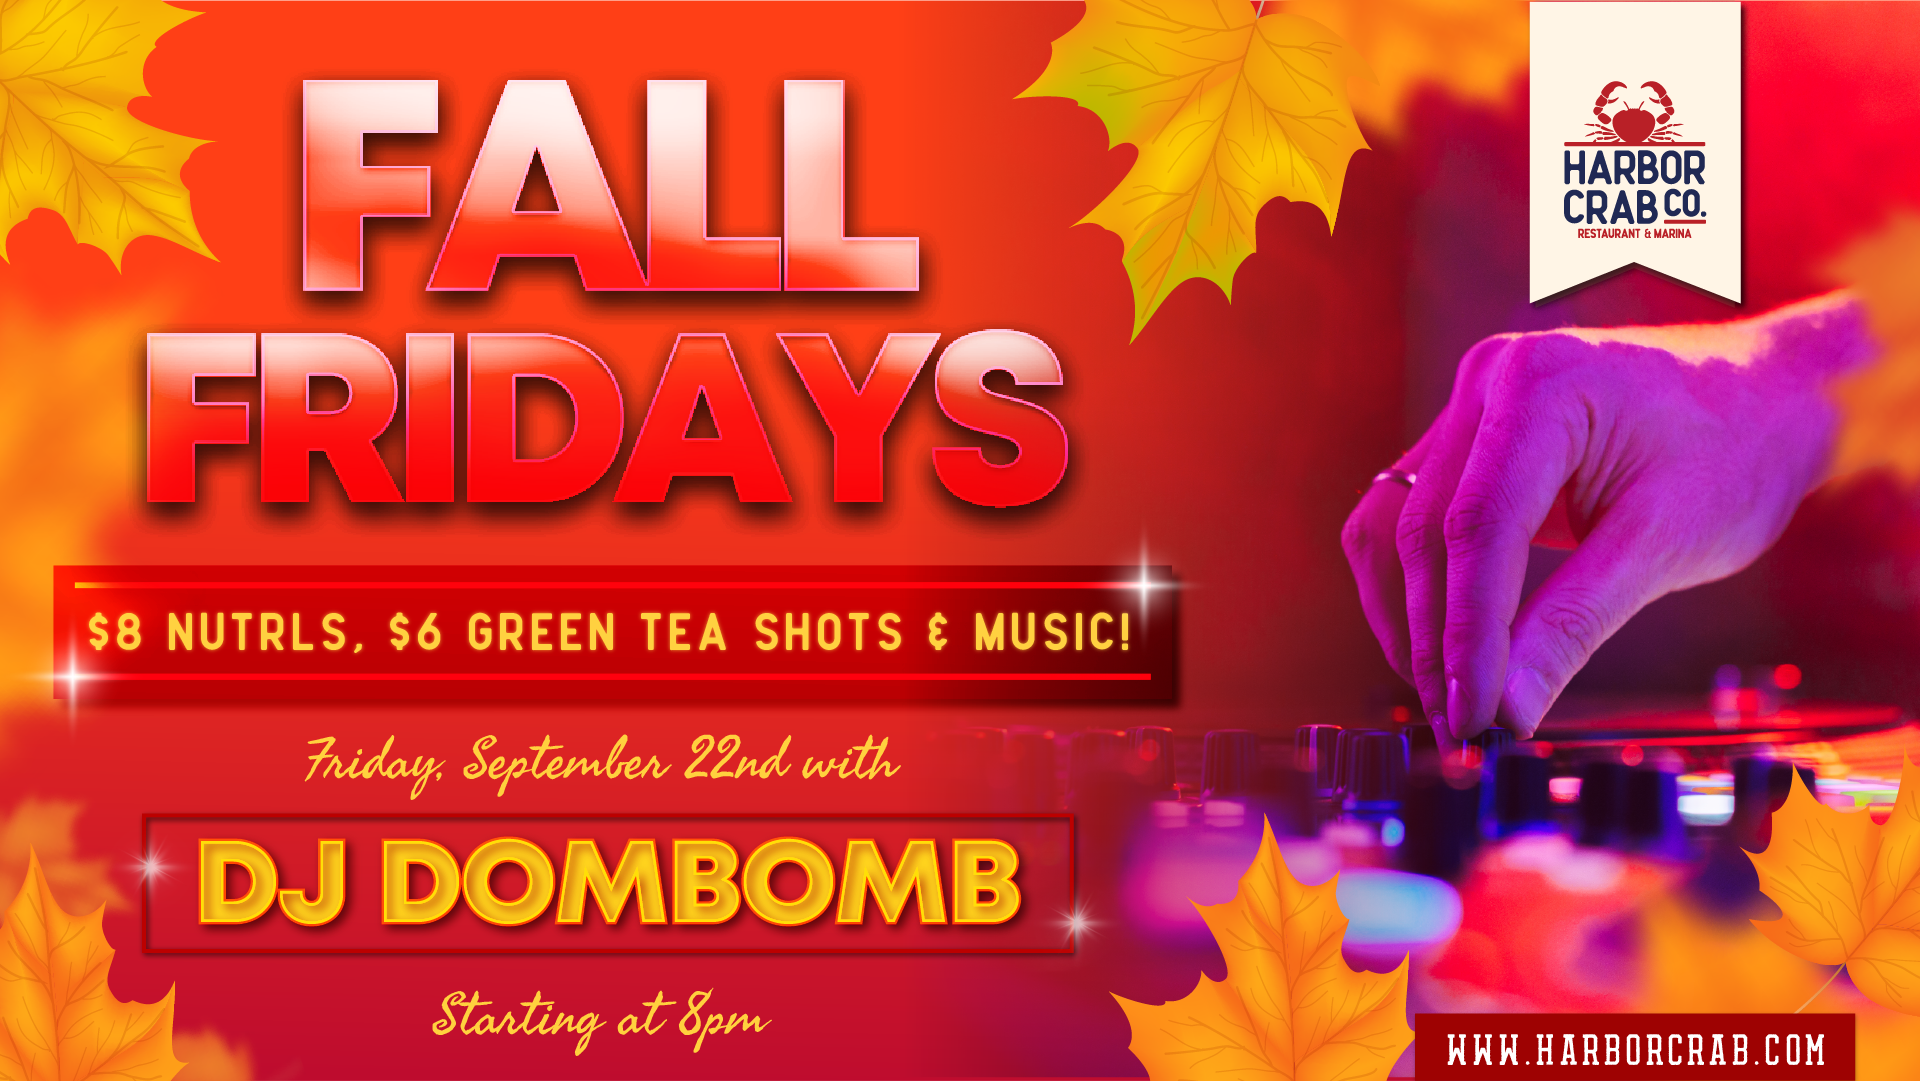 Fall Friday with DJ Dombomb on September 22nd